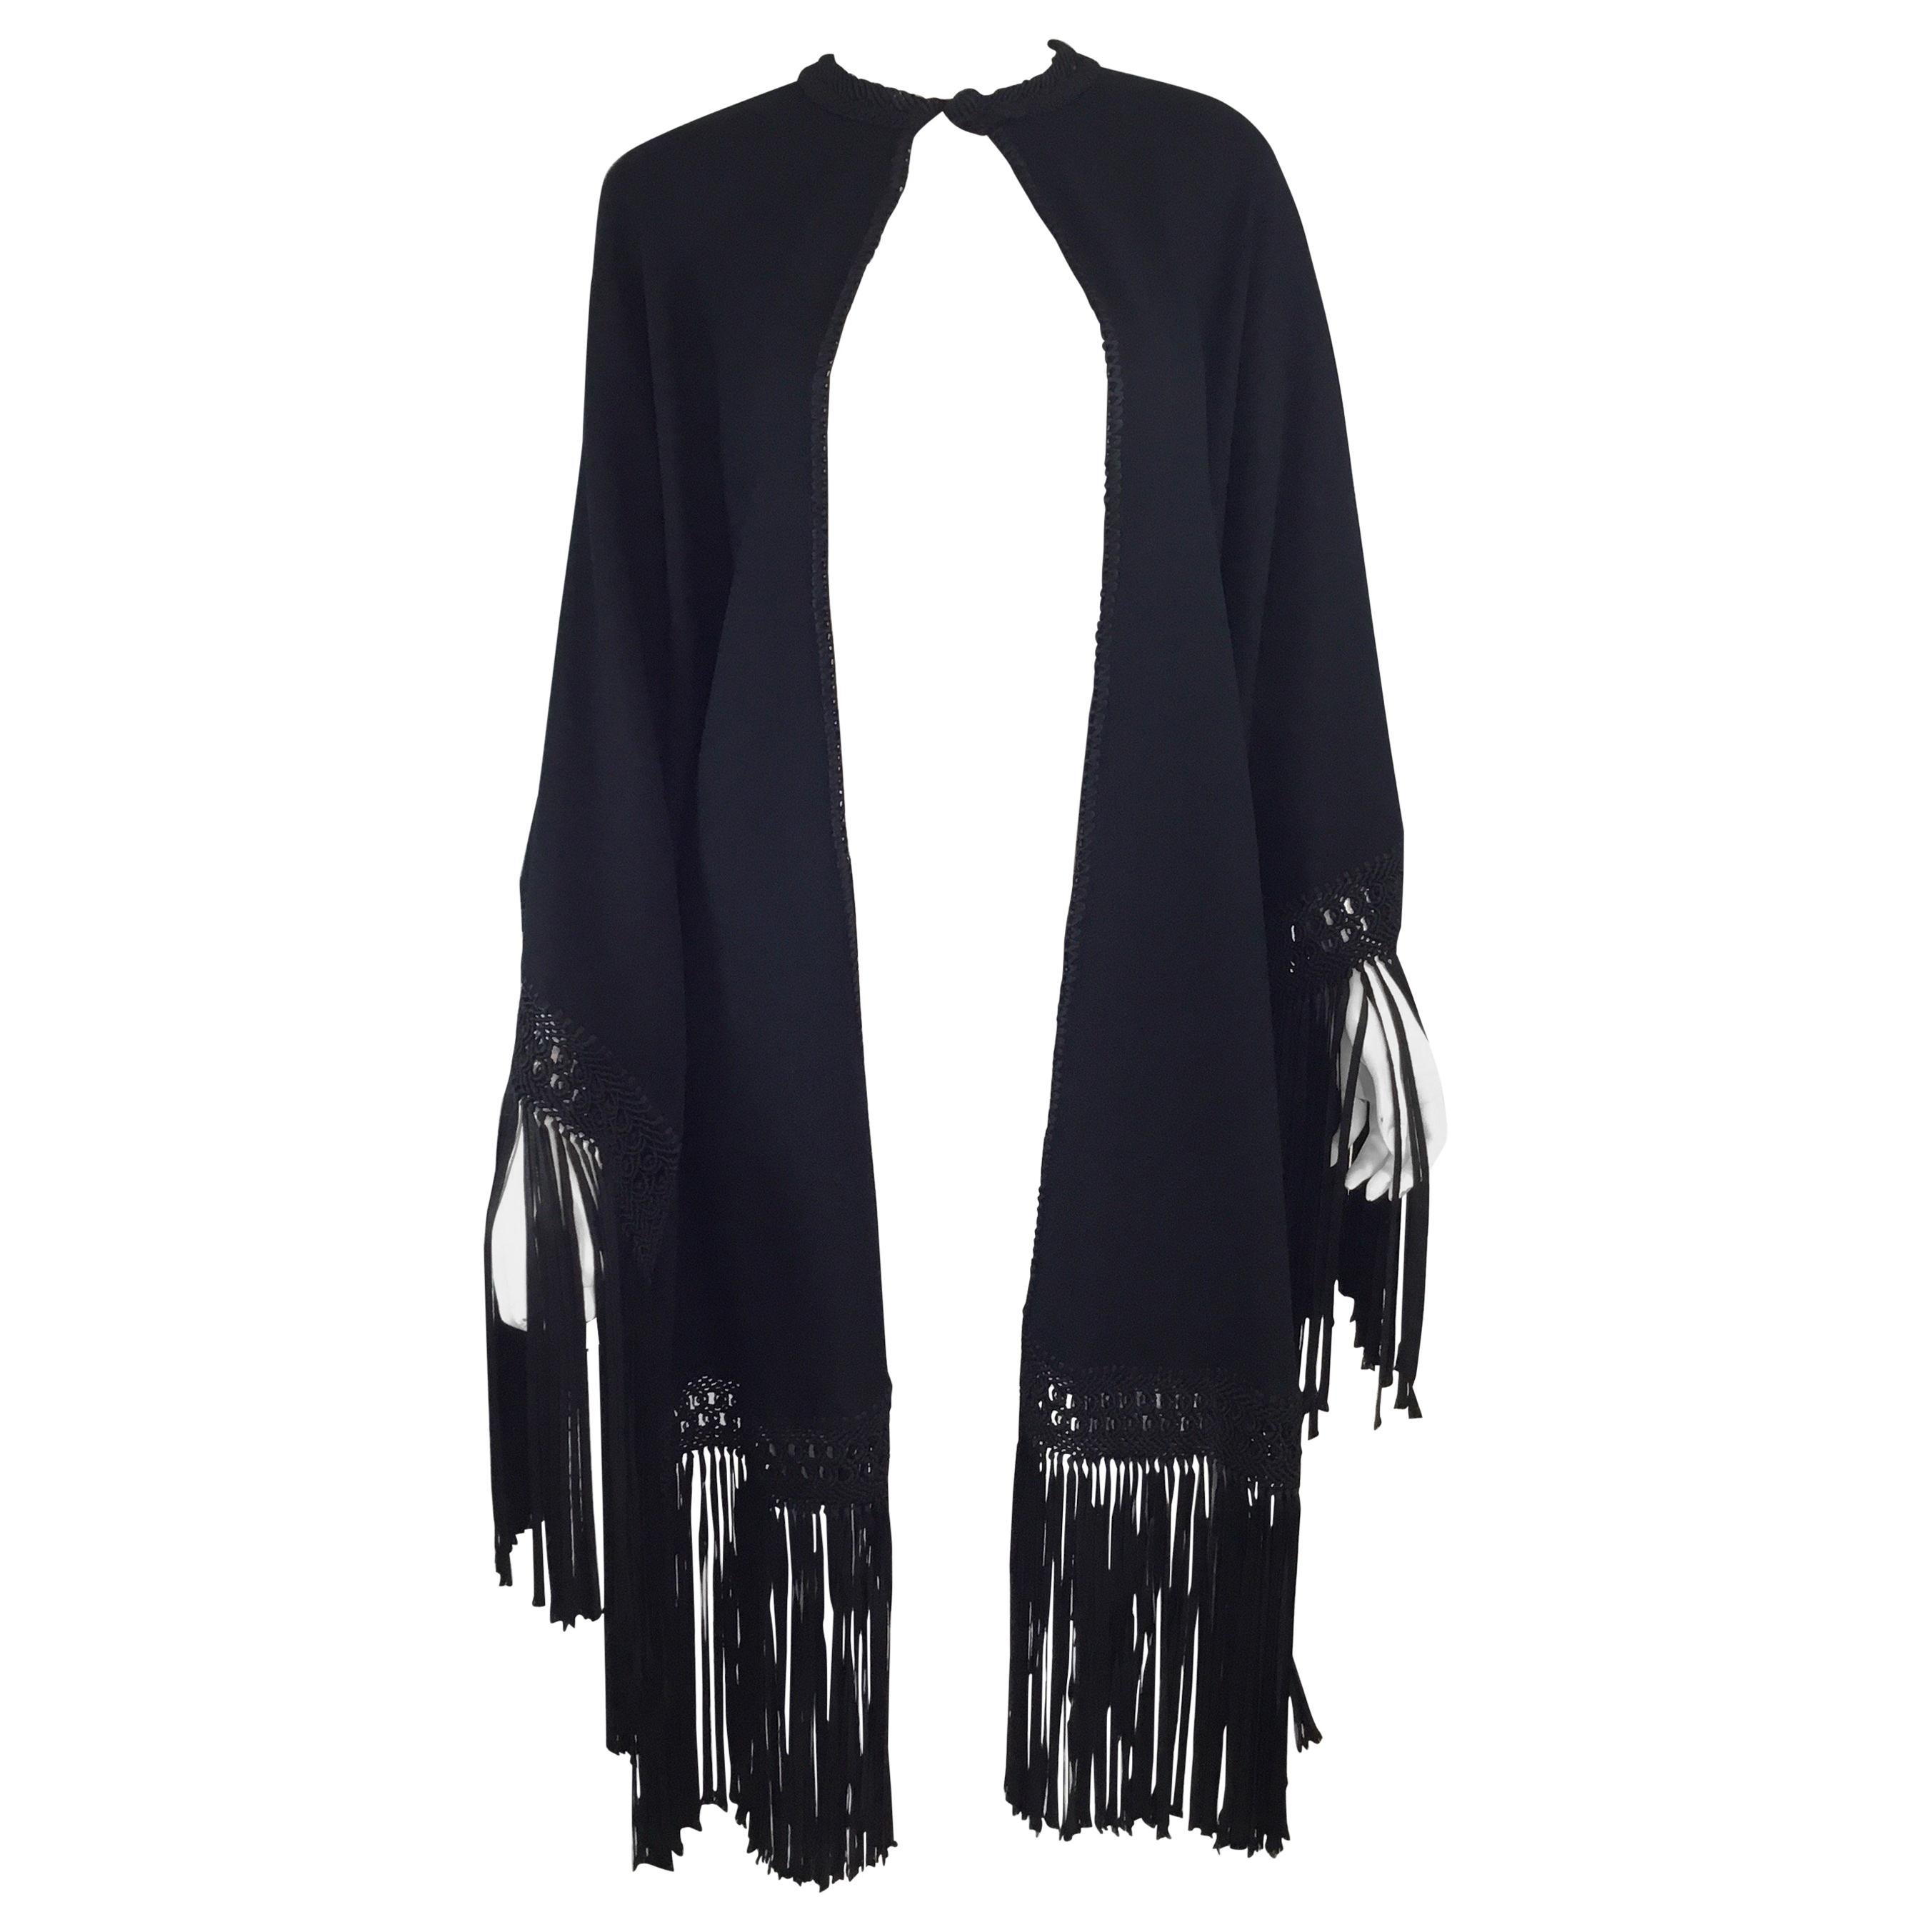 Black Wool and Crepe 1950’s Wrap with Fringe